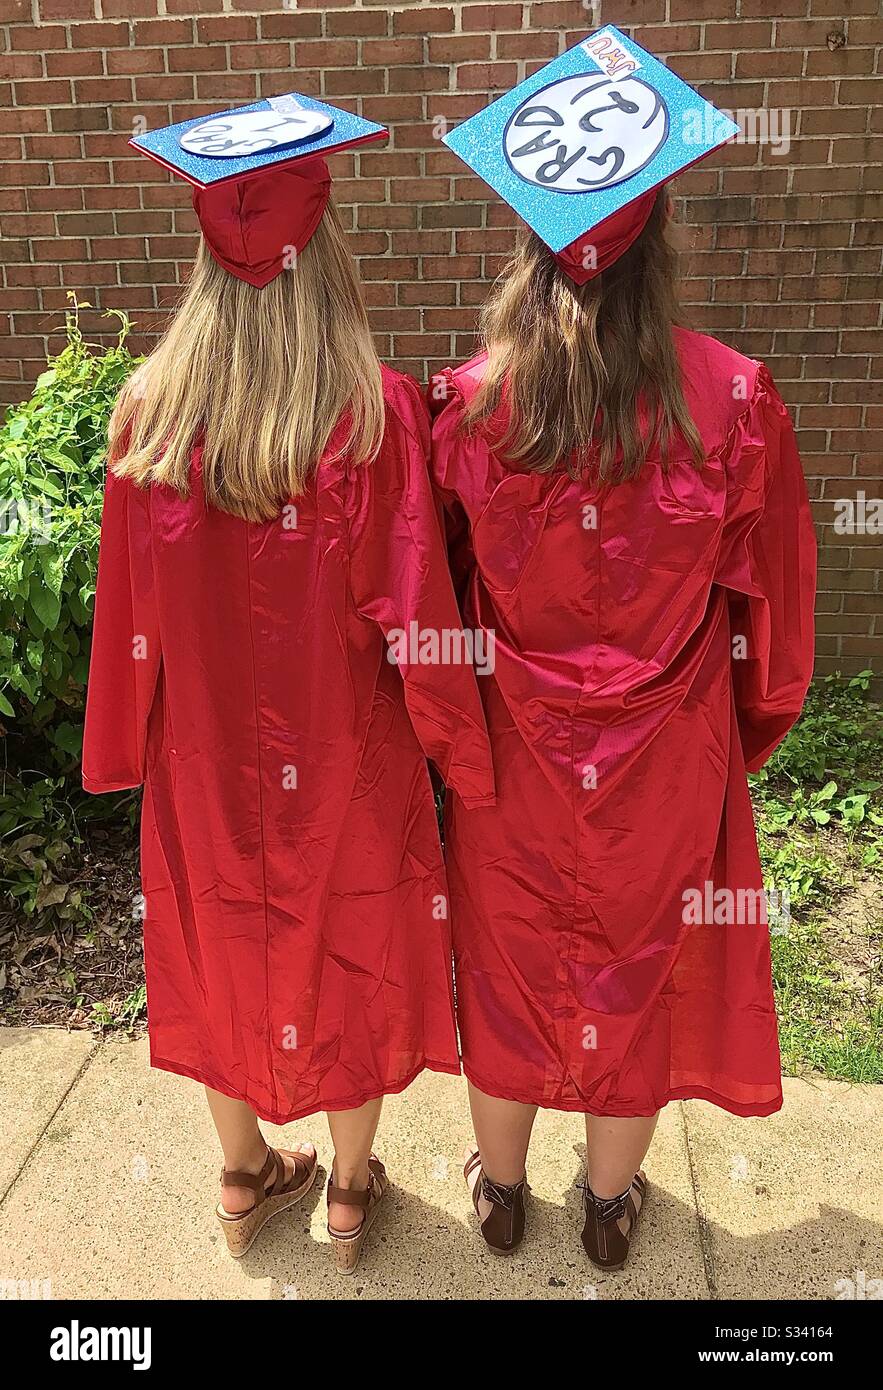 High school graduates in red cap and gown Stock Photo